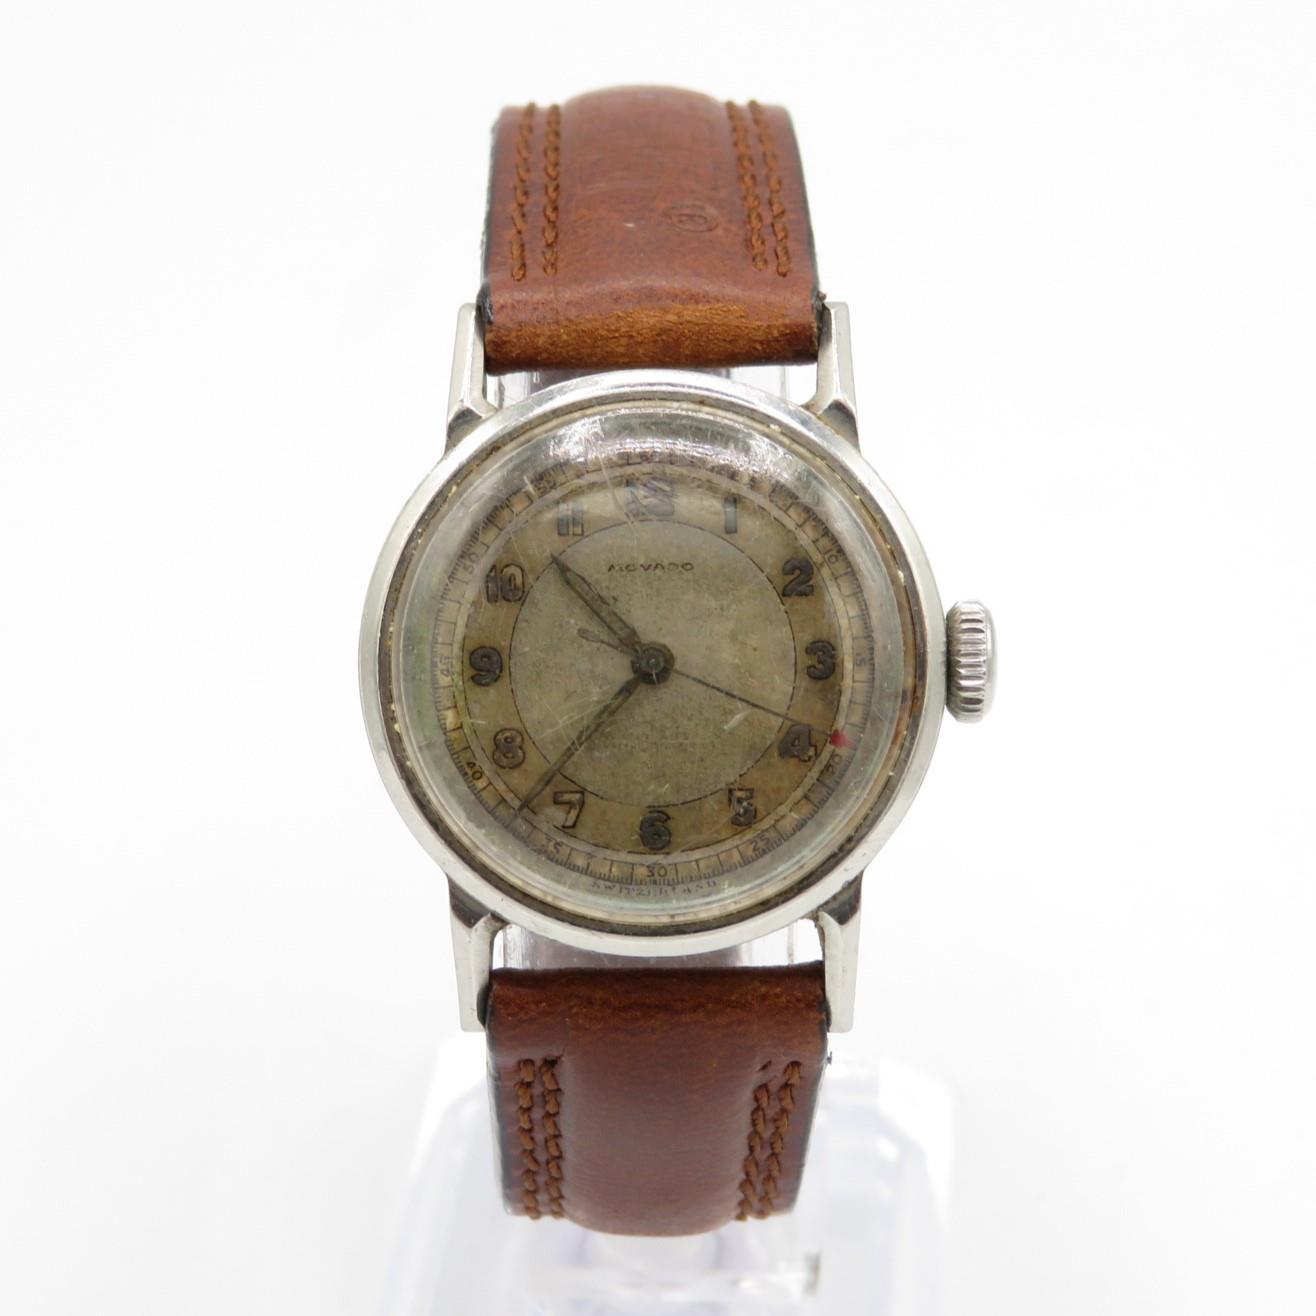 MOVADO Gents Military Style C.1940s WRISTWATCH Hand-wind WORKING // MOVADO Gents Military Style C.